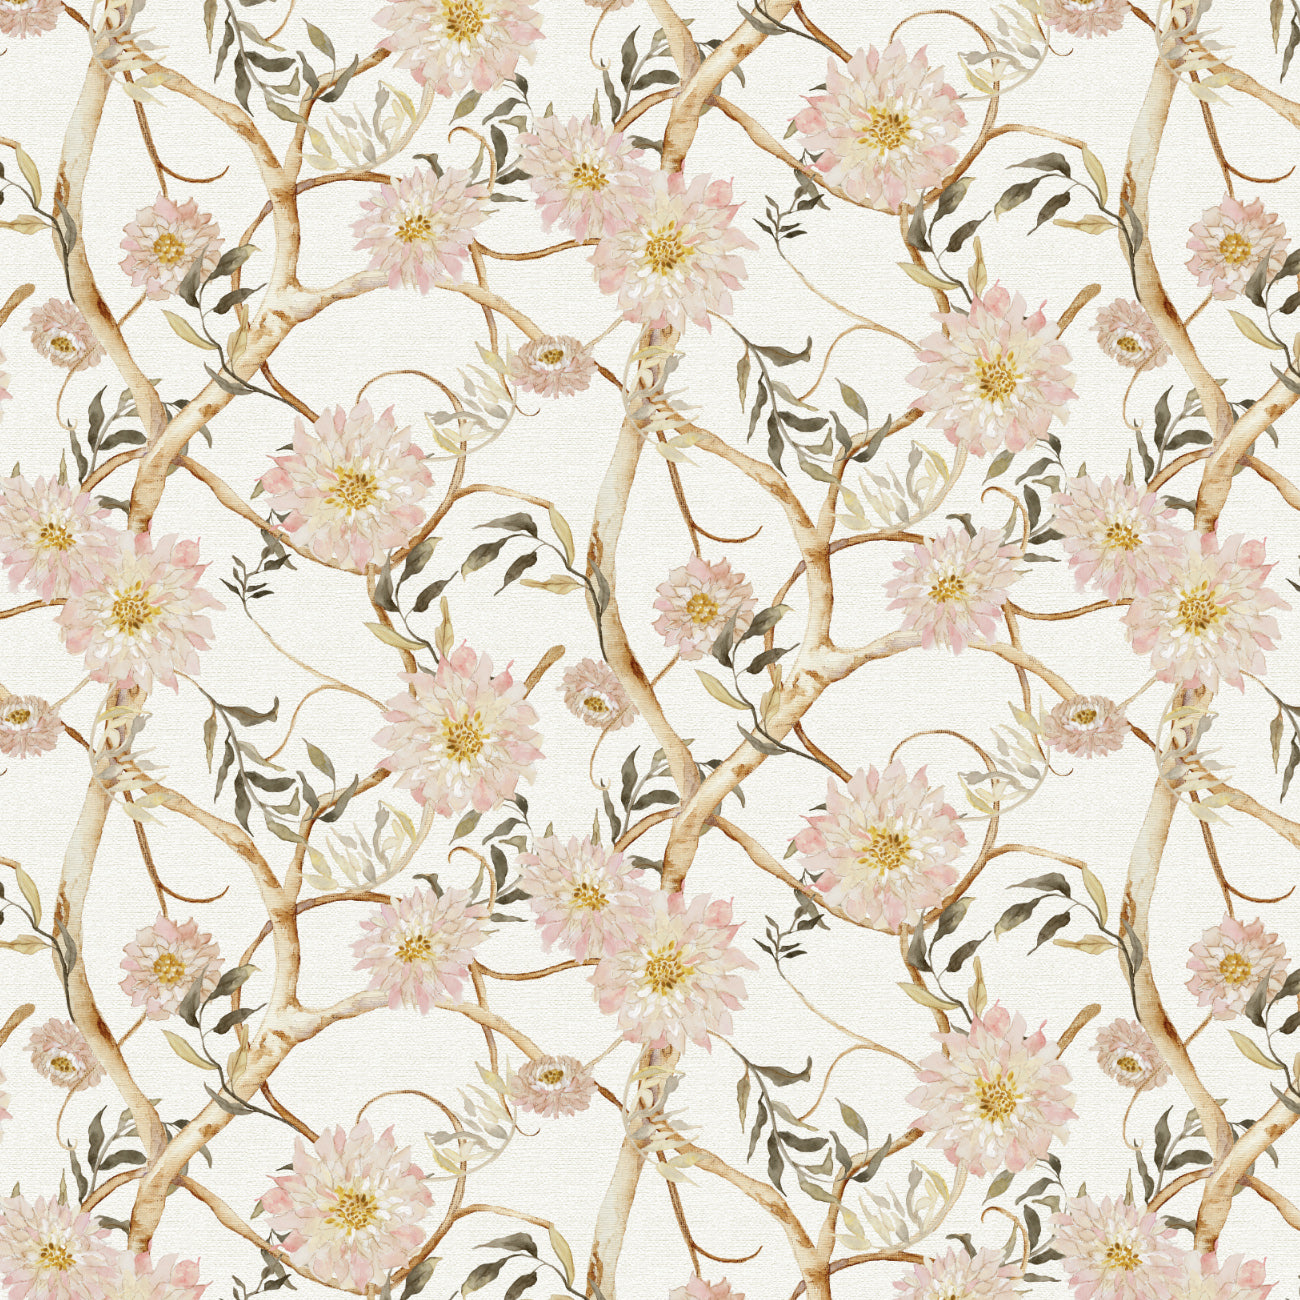 Bloom Tapestry Collection-Tangled Blooms-Cream-100% Cotton 55230802-02